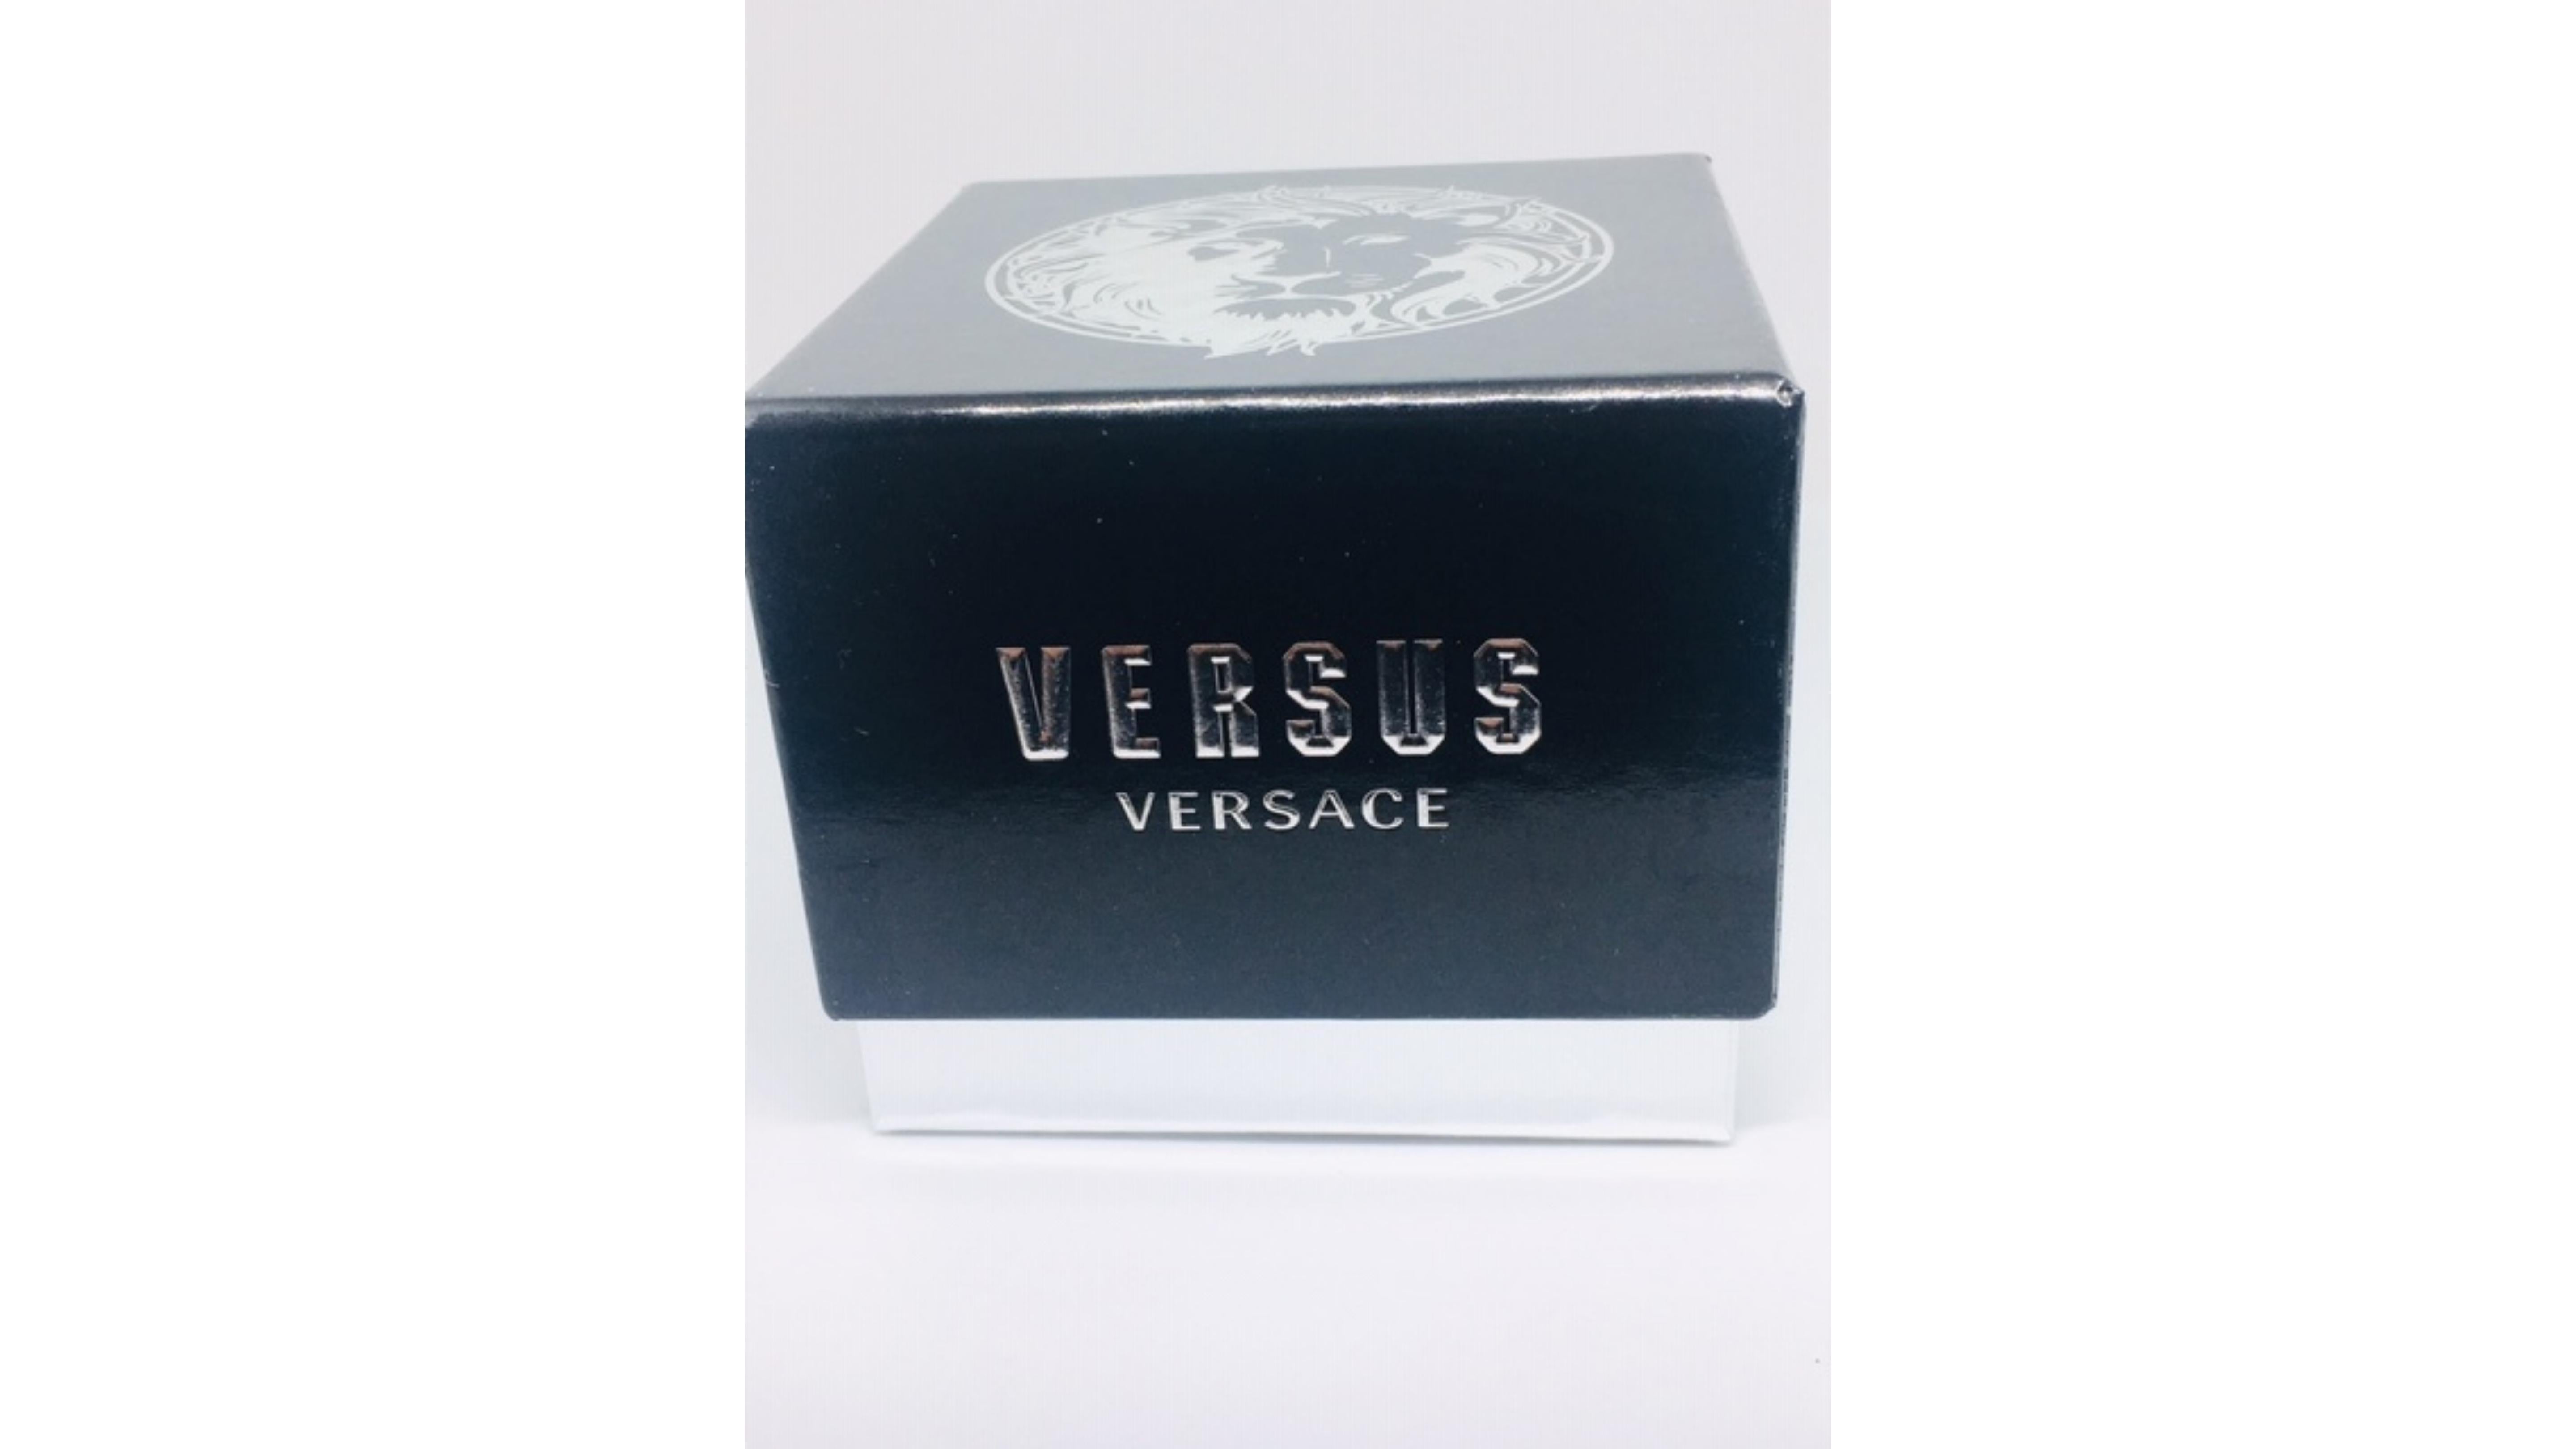 
Versace  By Versus Mens Watch   with silver features  on the dial ,  Very Contemporary and will also make a ideal gifts 

Quartz Chronograph movement
Black IP Black Bracelet
Deployment clasp
Mineral crystal
Case: 45mm
Manufacturer's limited warranty